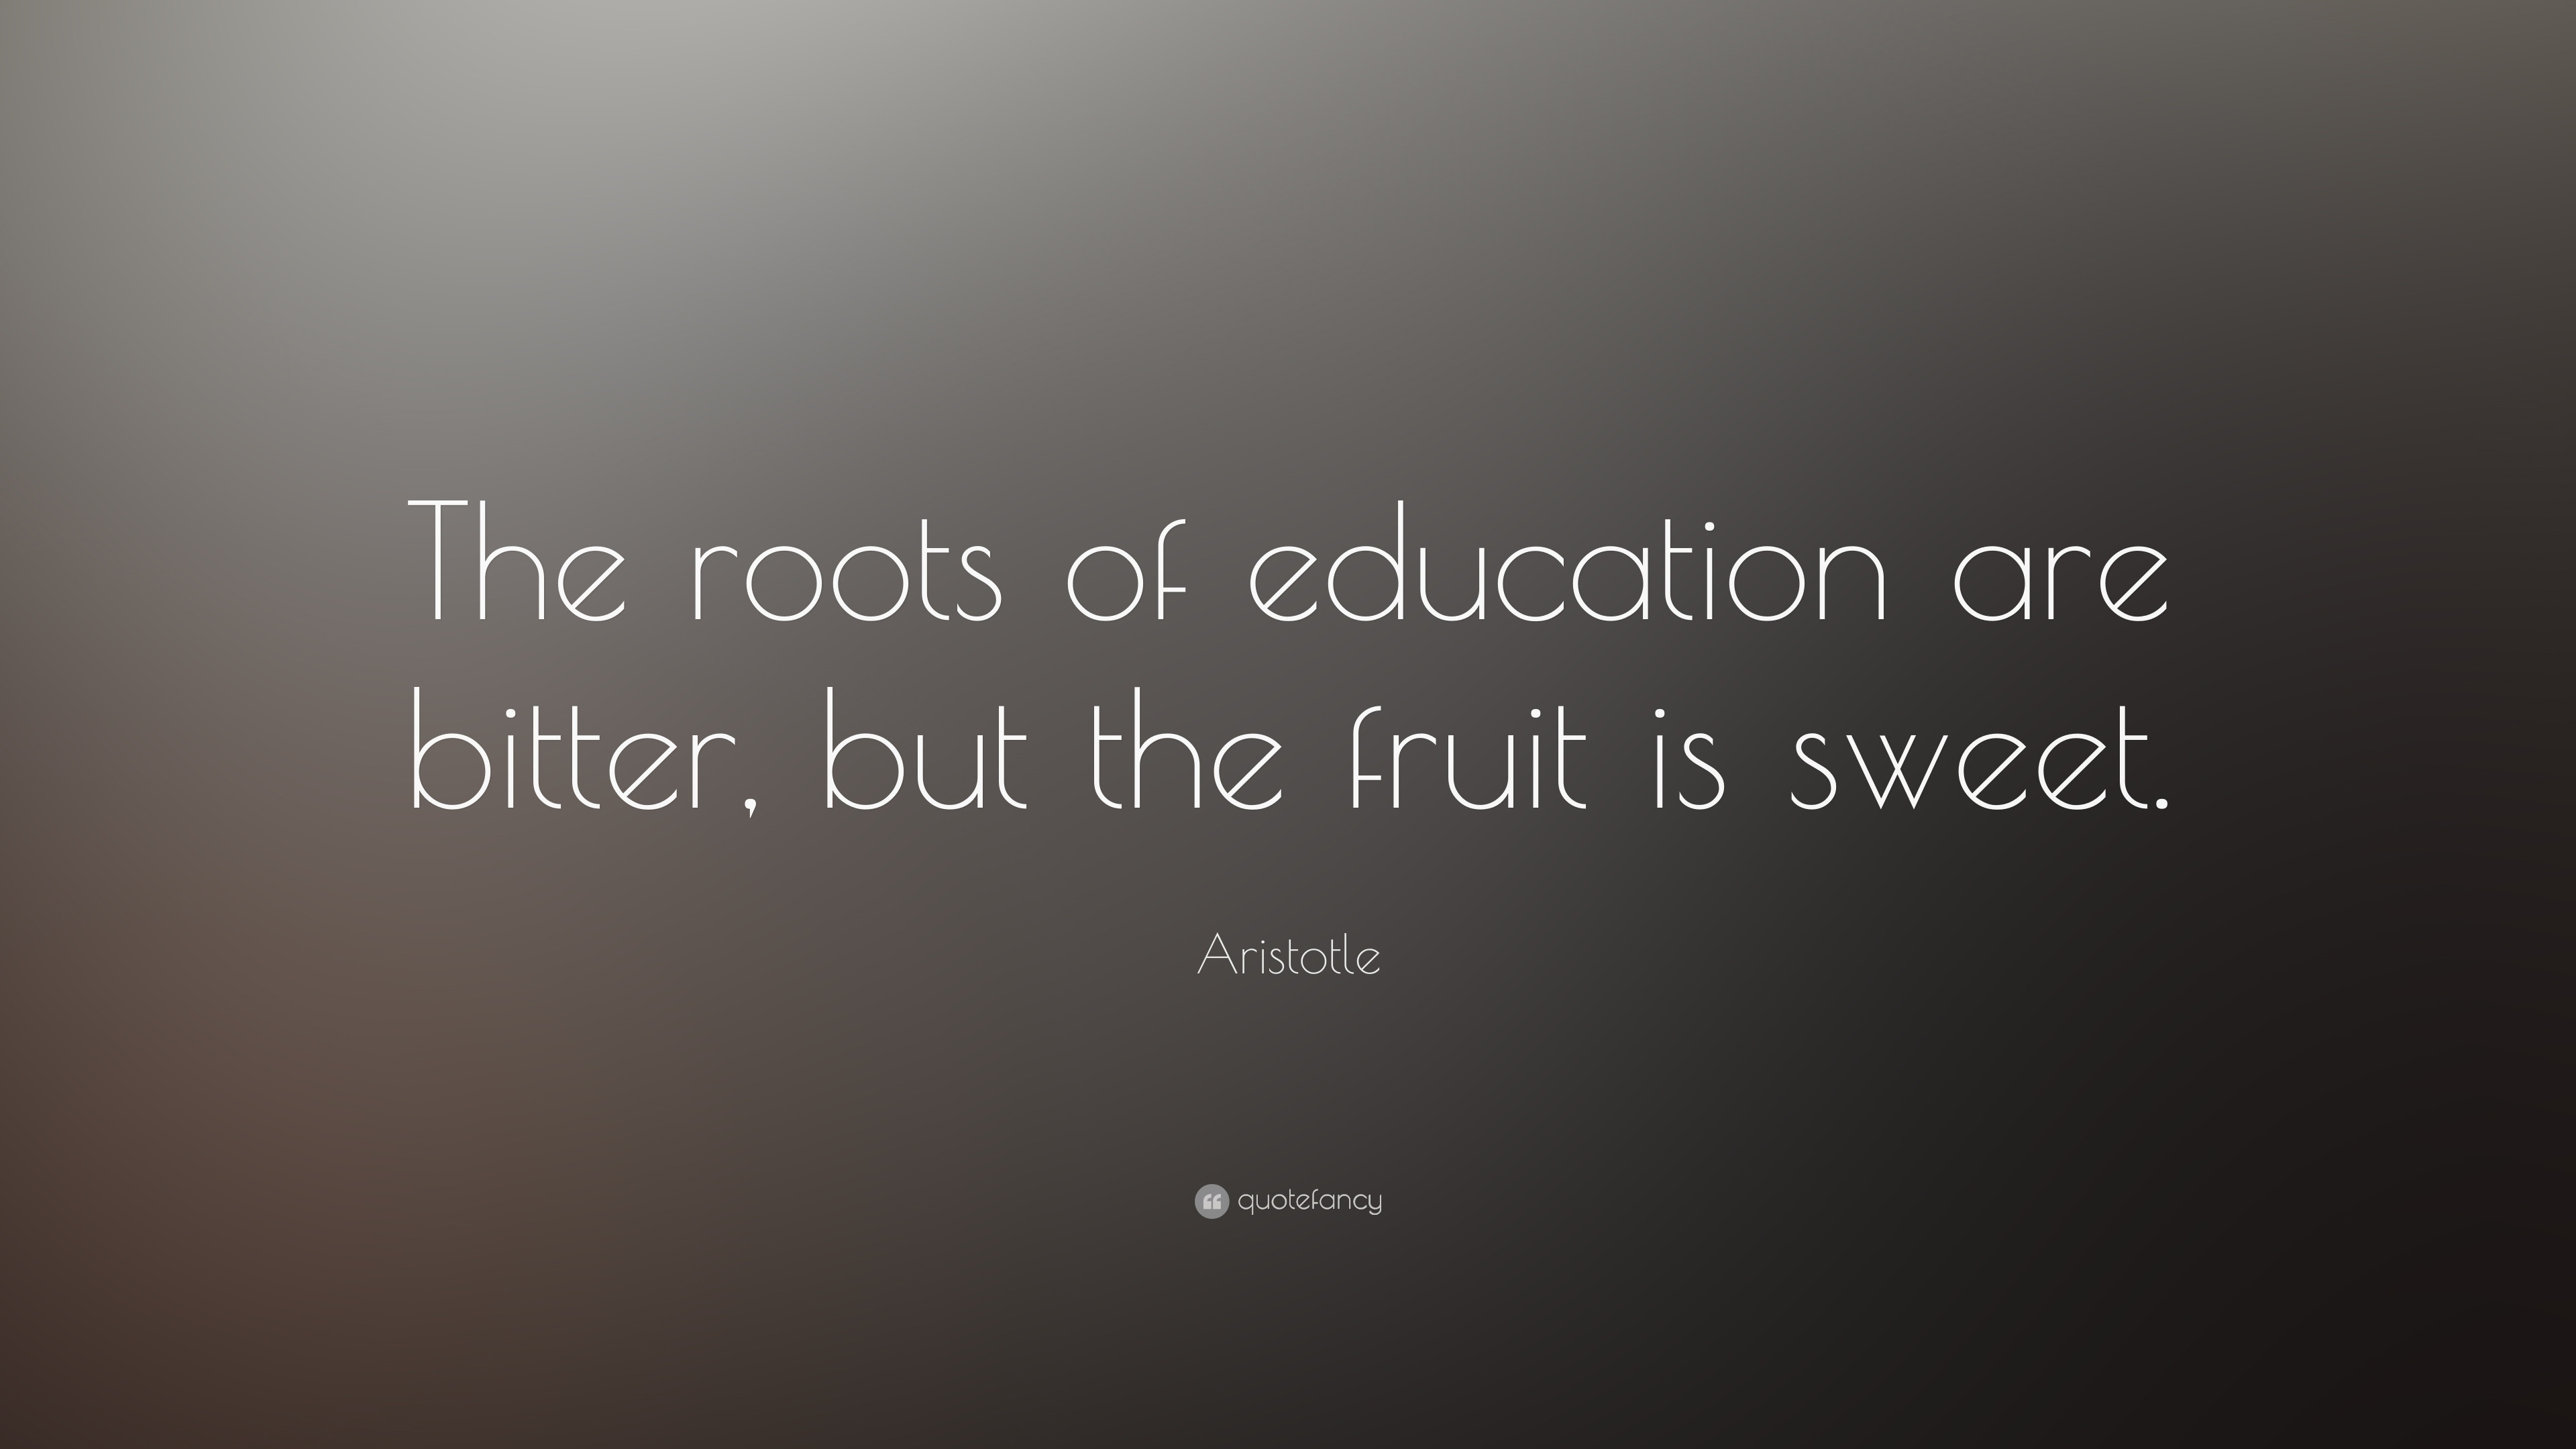 Aristotle Education Quotes
 Aristotle Quote “The roots of education are bitter but